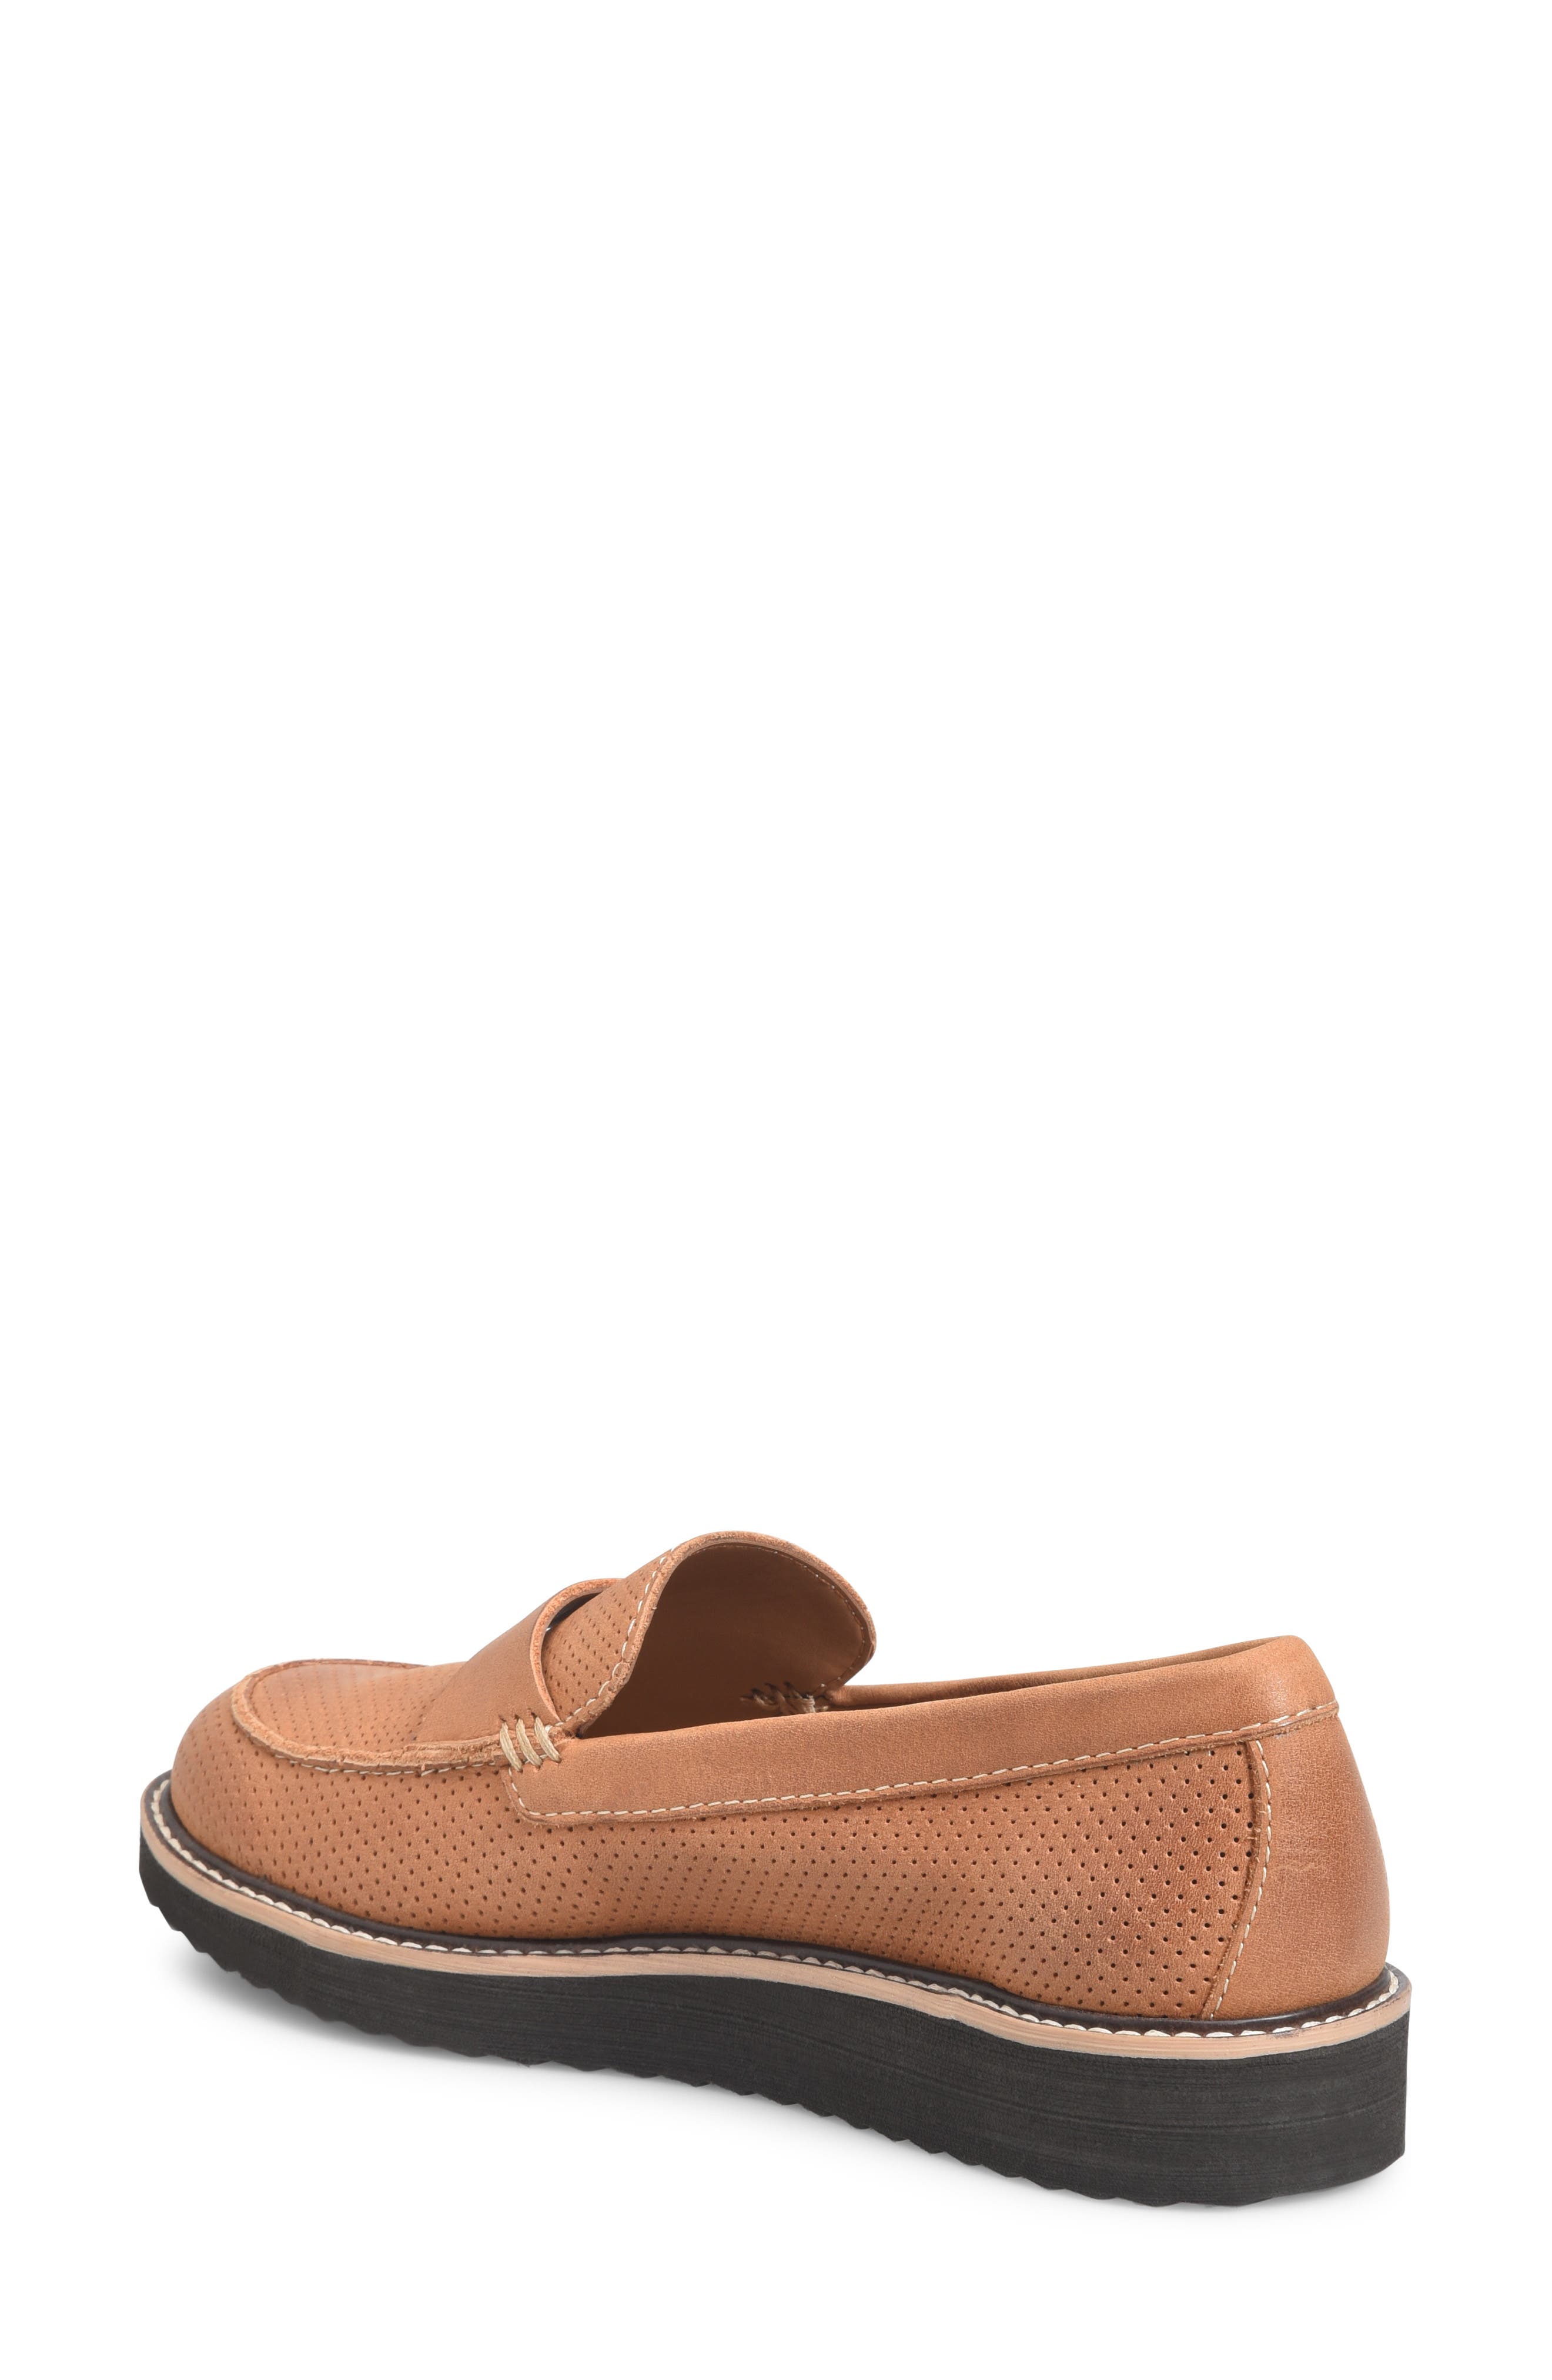 Comfortiva Laina Loafer In Luggage Leather | ModeSens